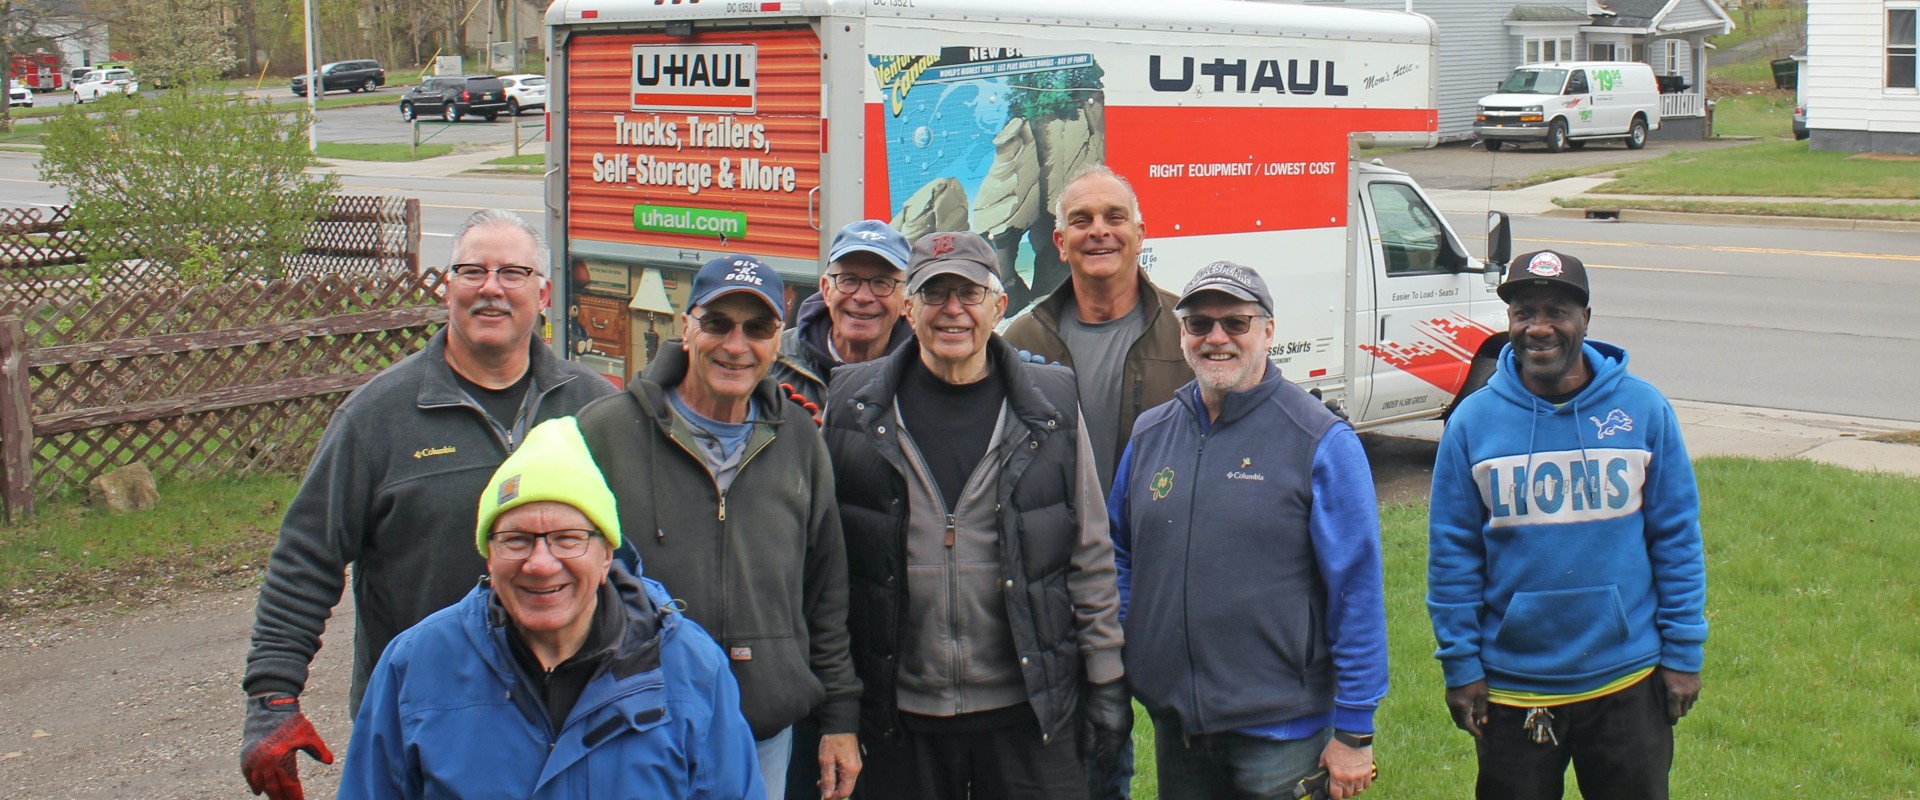 Volunteer With Long Distance Movers: Three Movers